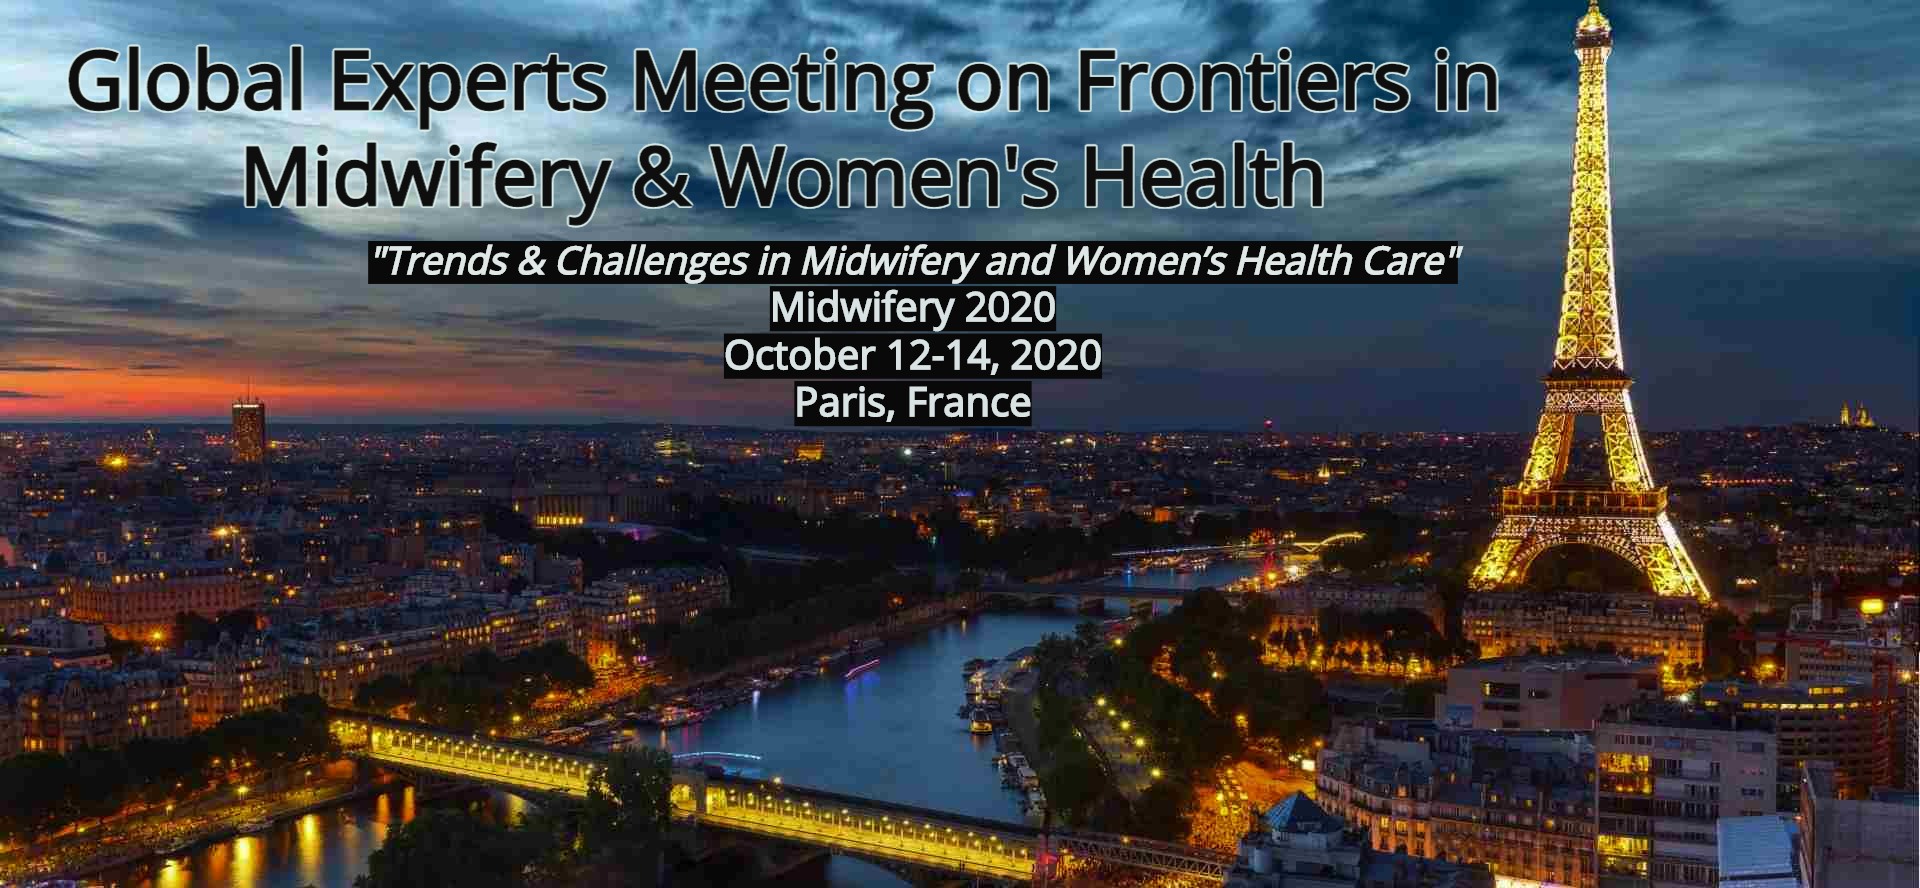 Global Experts Meeting on Frontiers in Midwifery & Womens Health, Paris/France, Paris, France